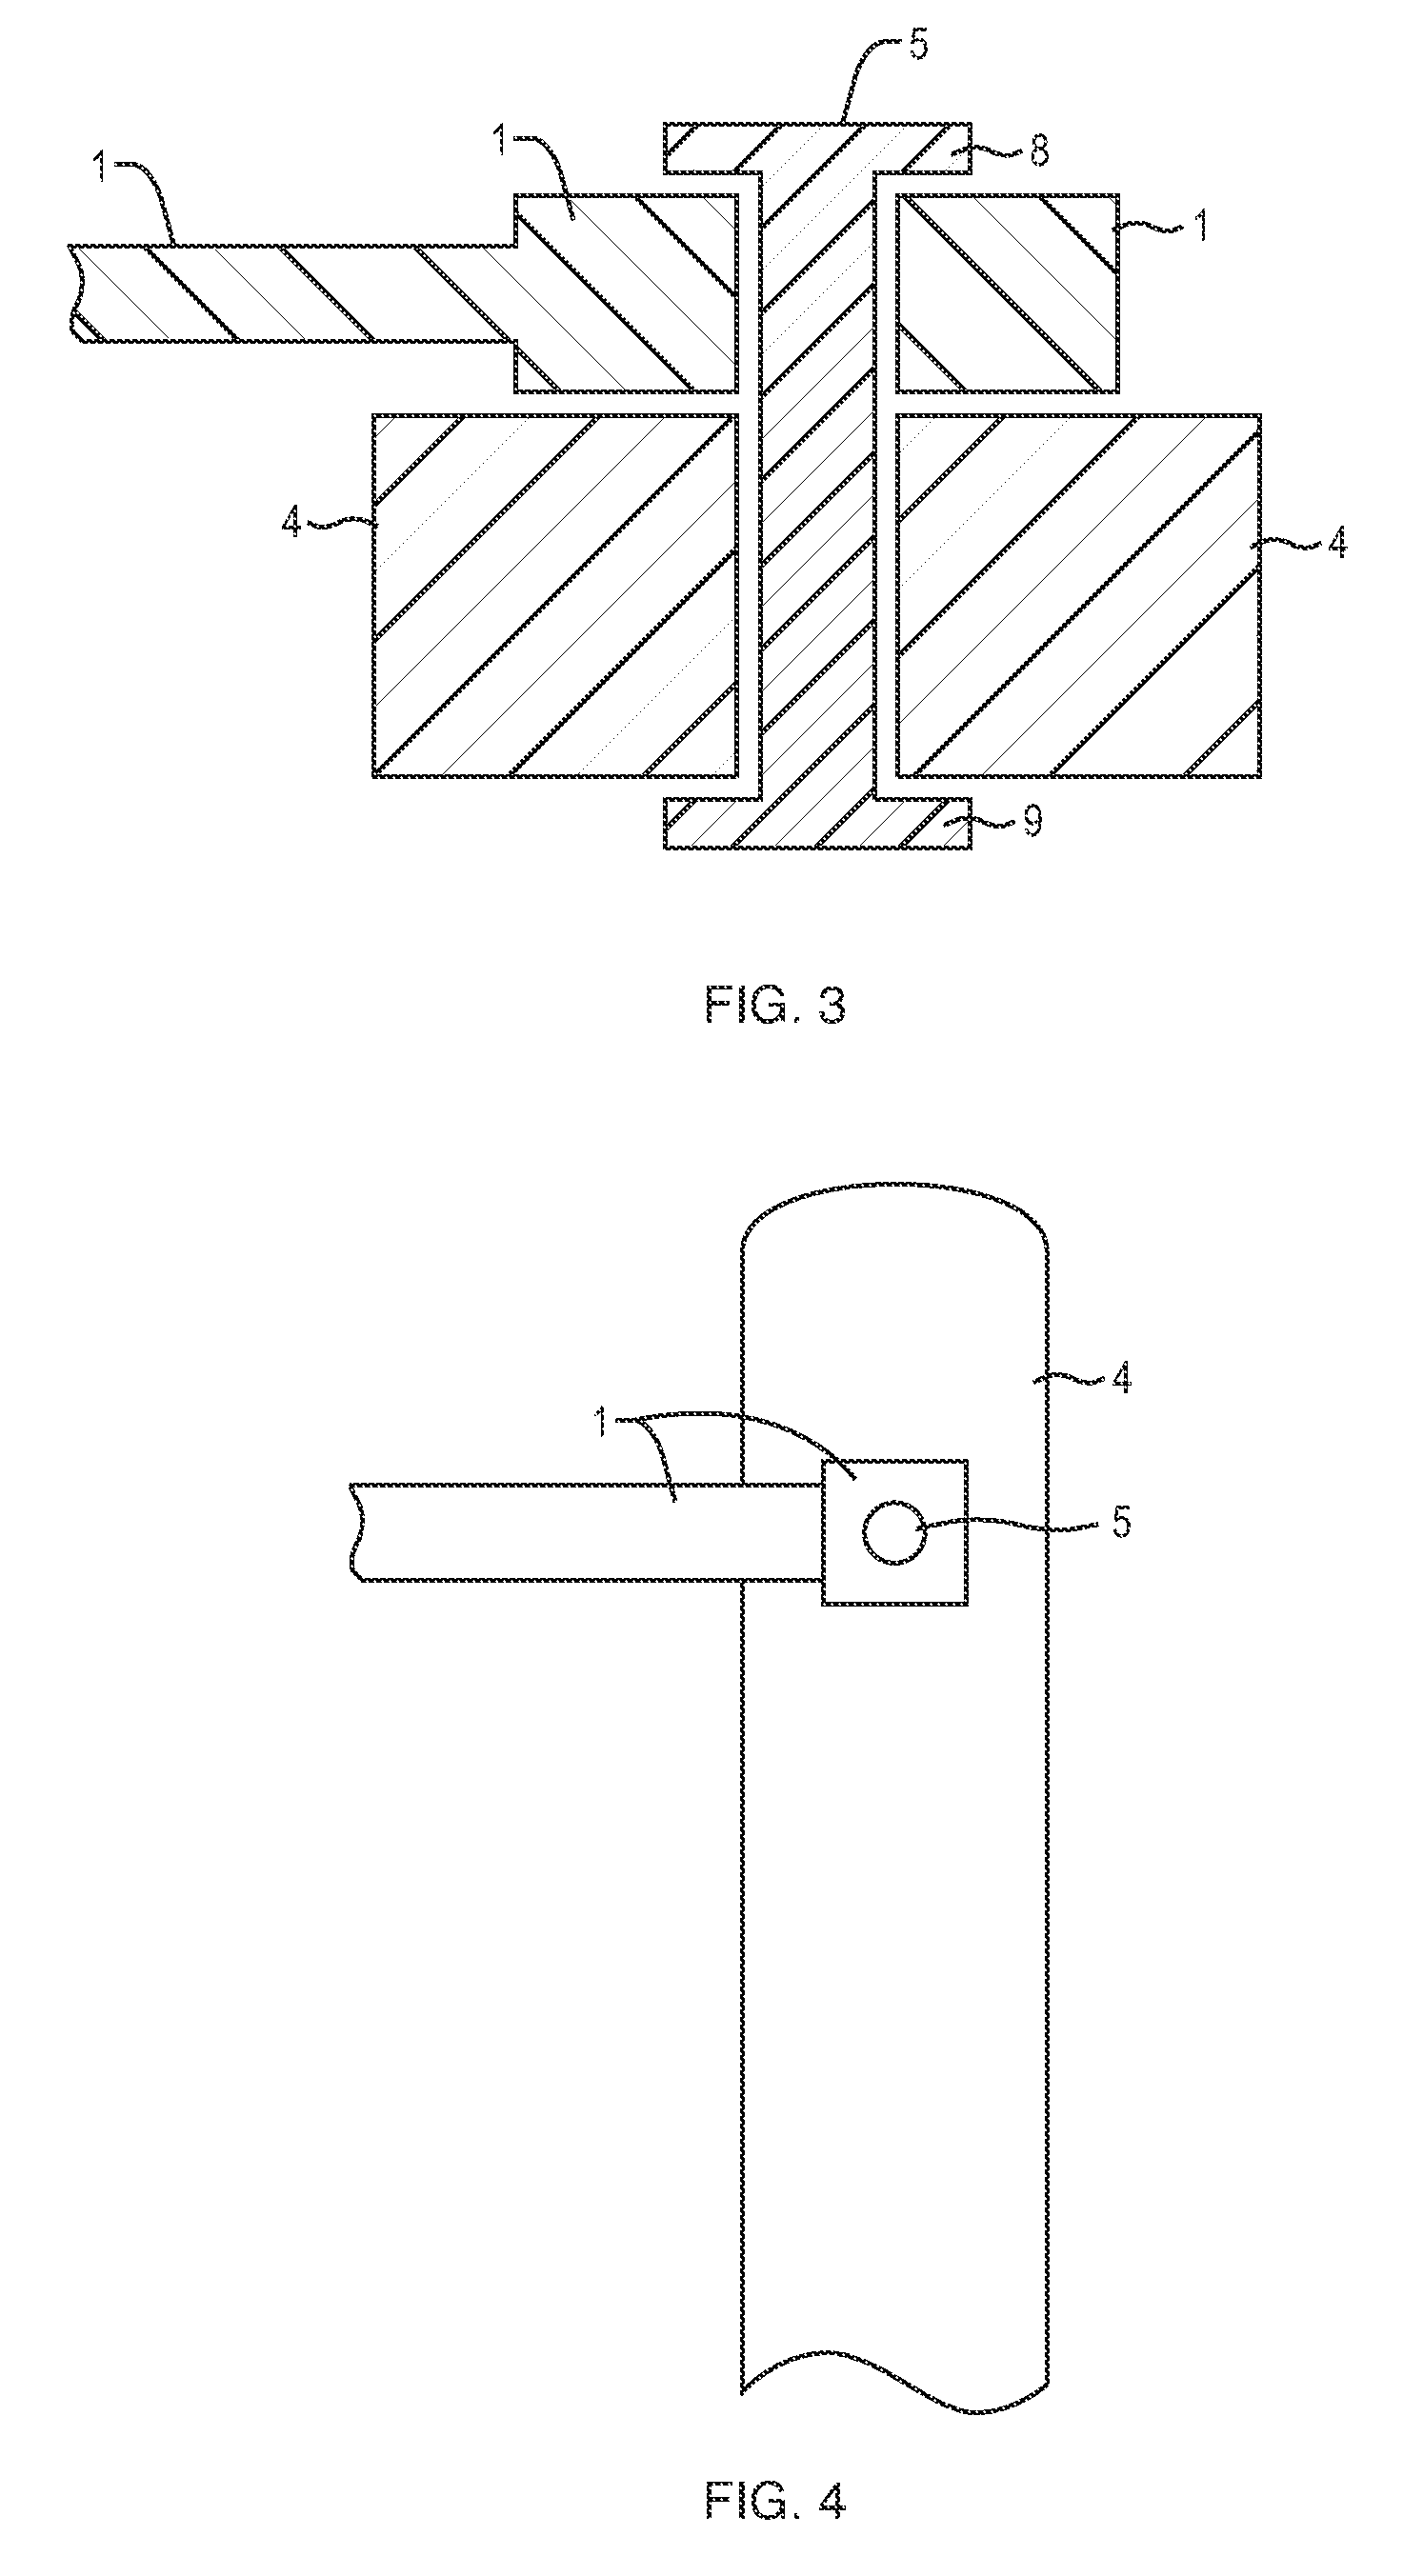 Methods and apparatus for manufacturing a computer without assembly